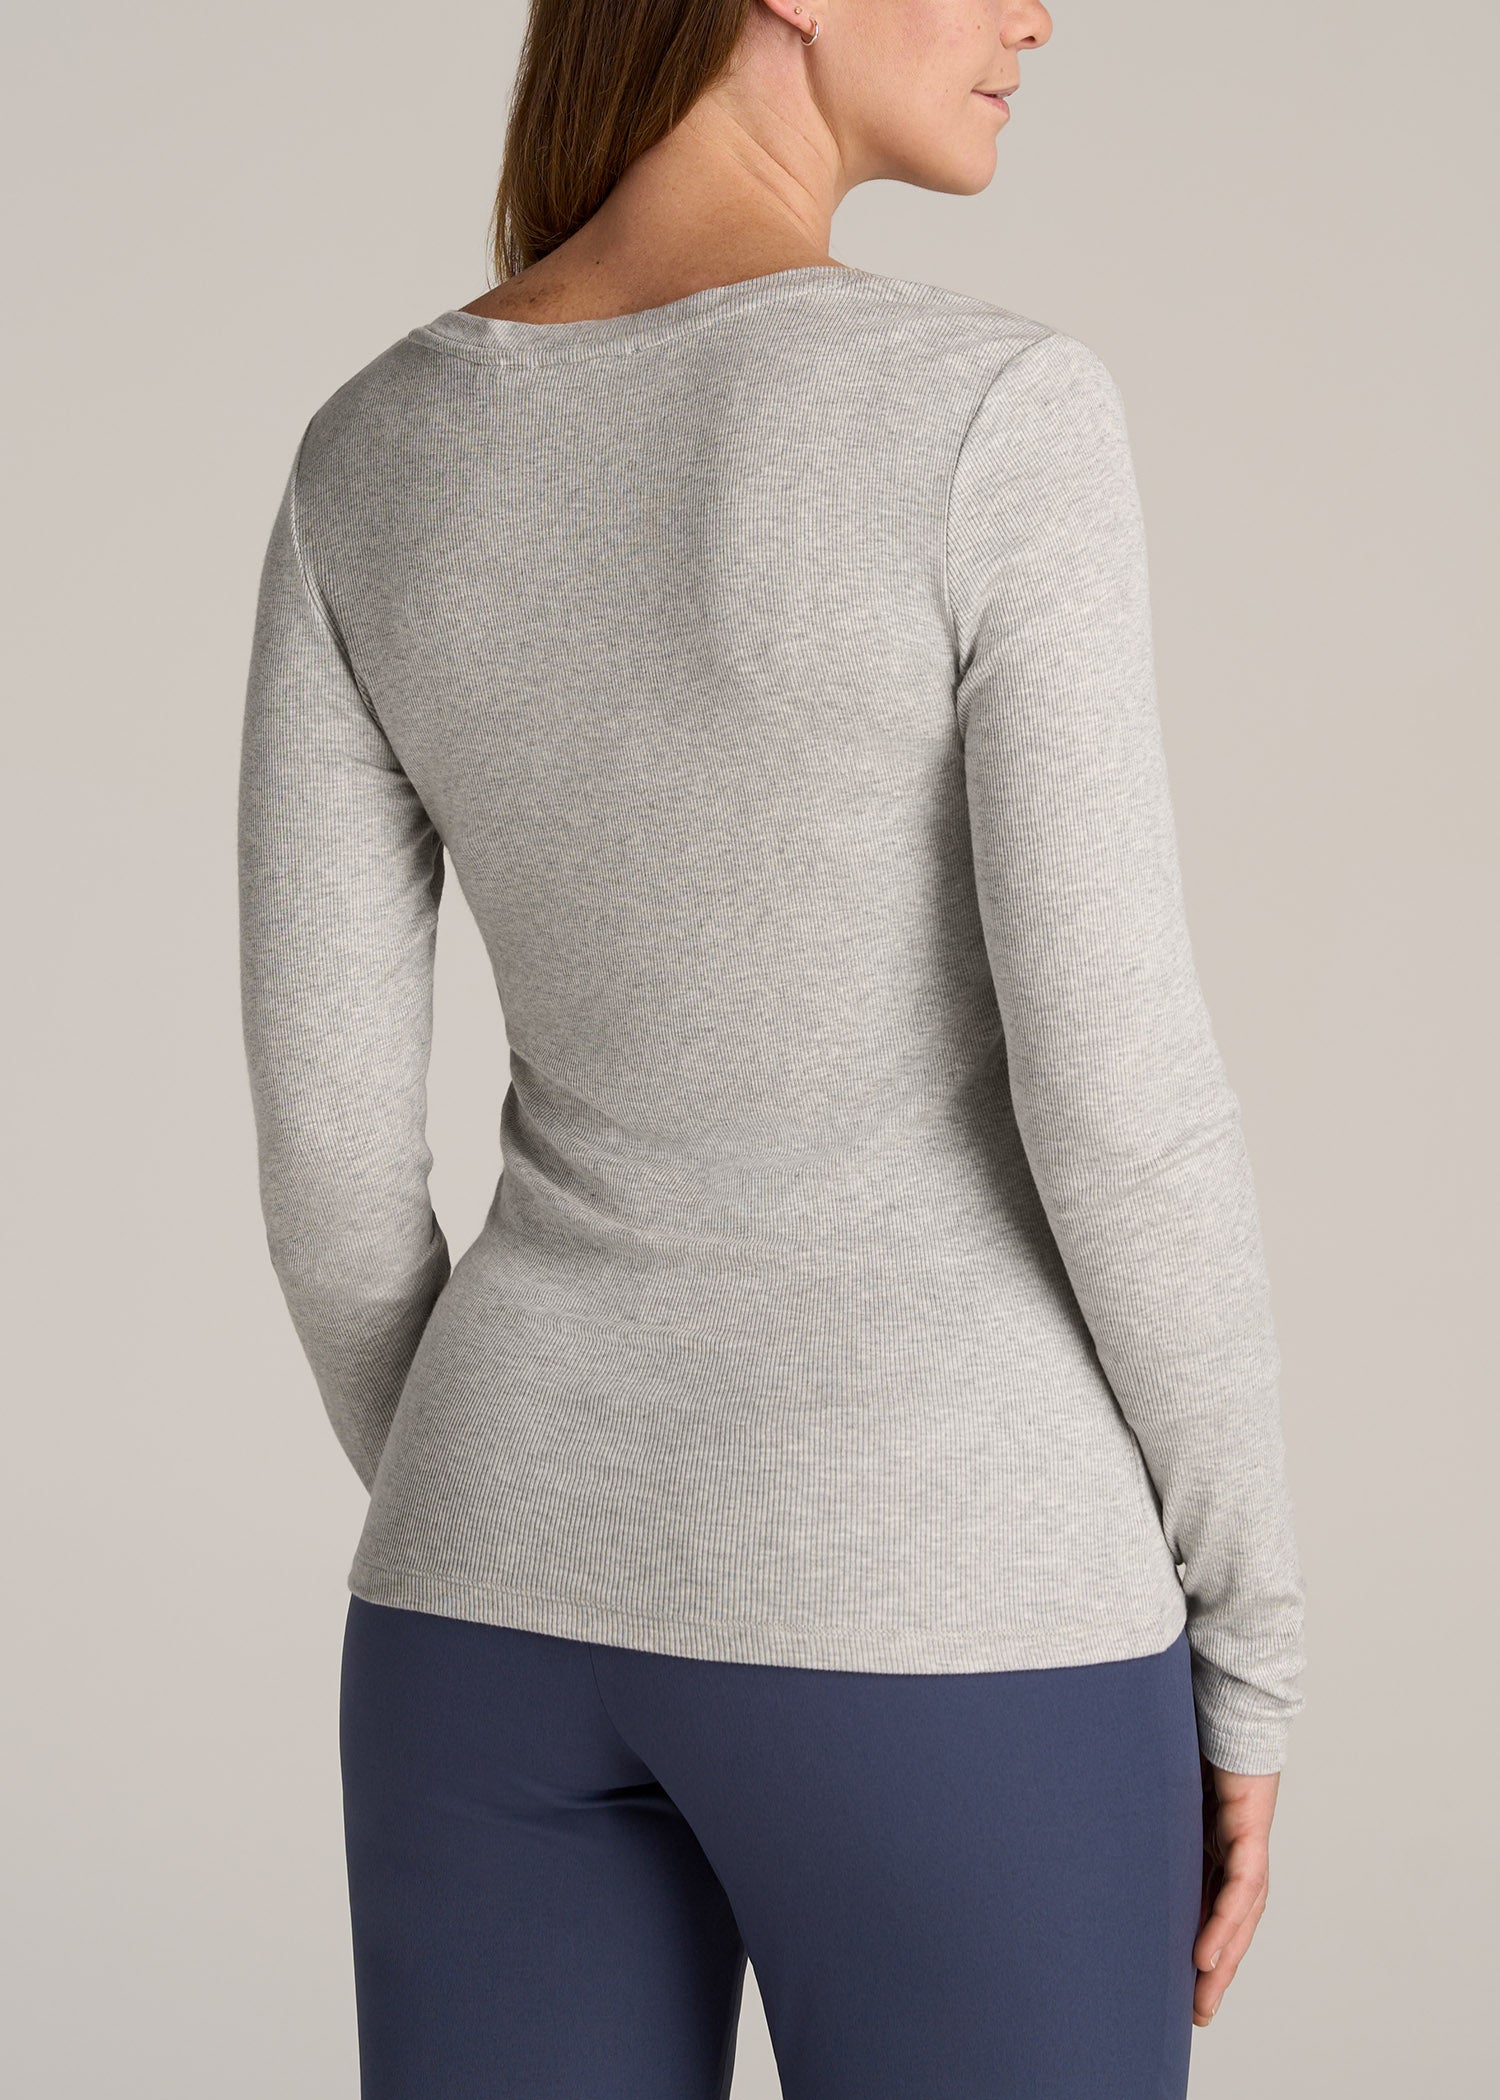 FITTED Ribbed Long Sleeve Tee in Navy - Tall Women's Shirts